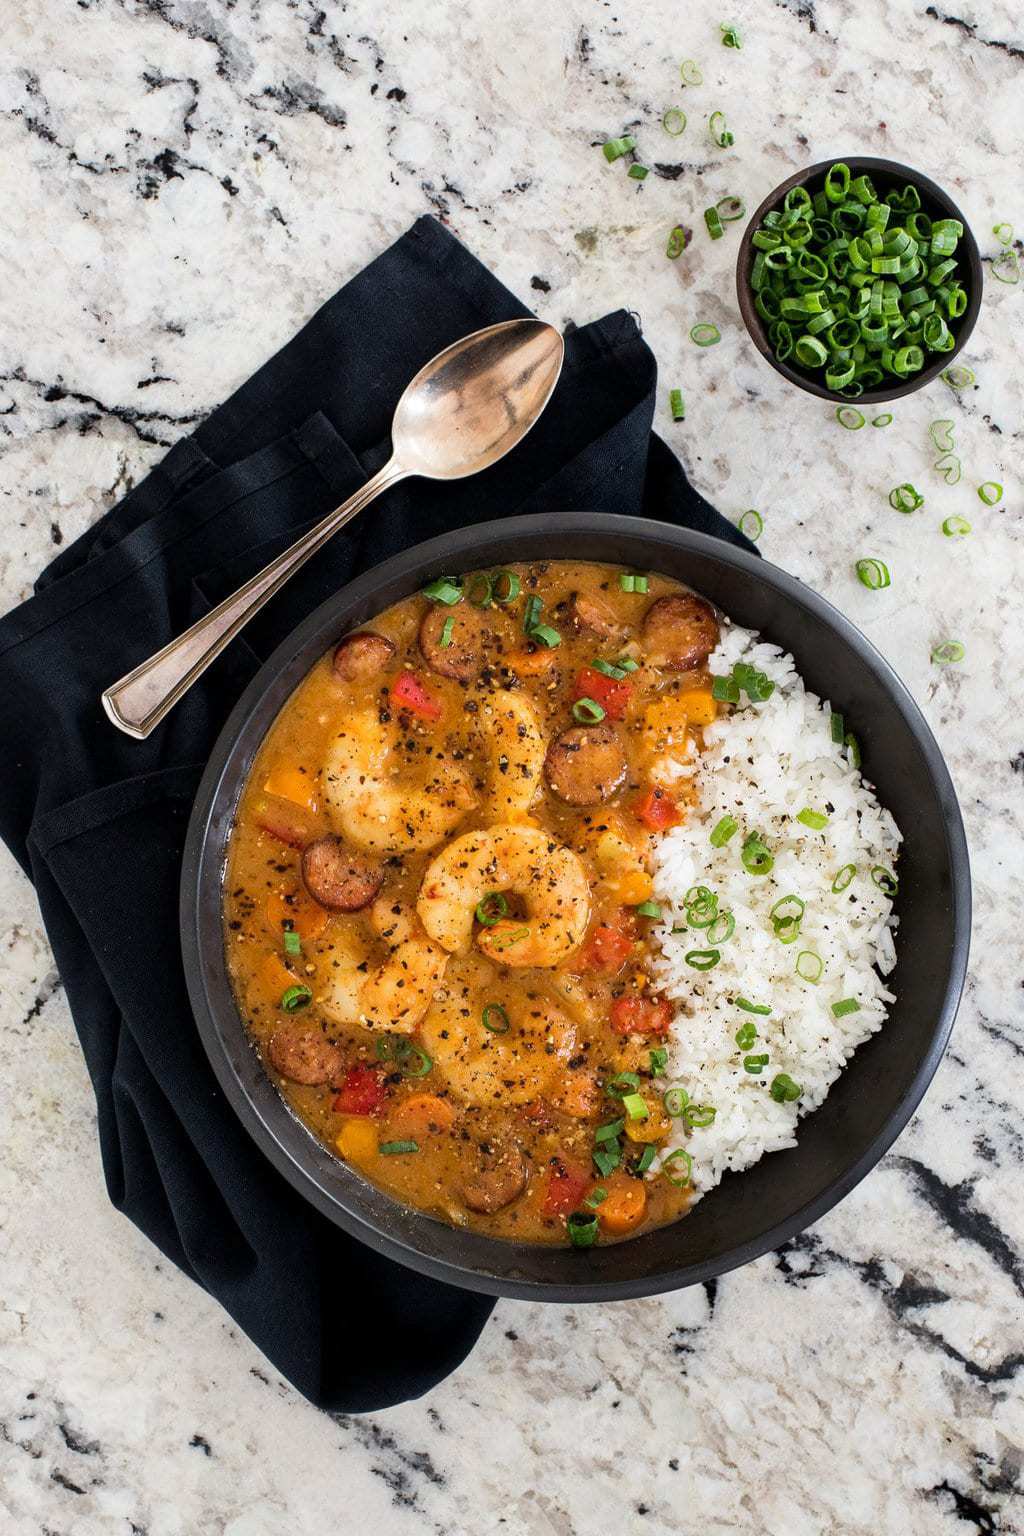 Overhead view of Shrimp and Andouille Gumbo with Rice on a granite countertop.